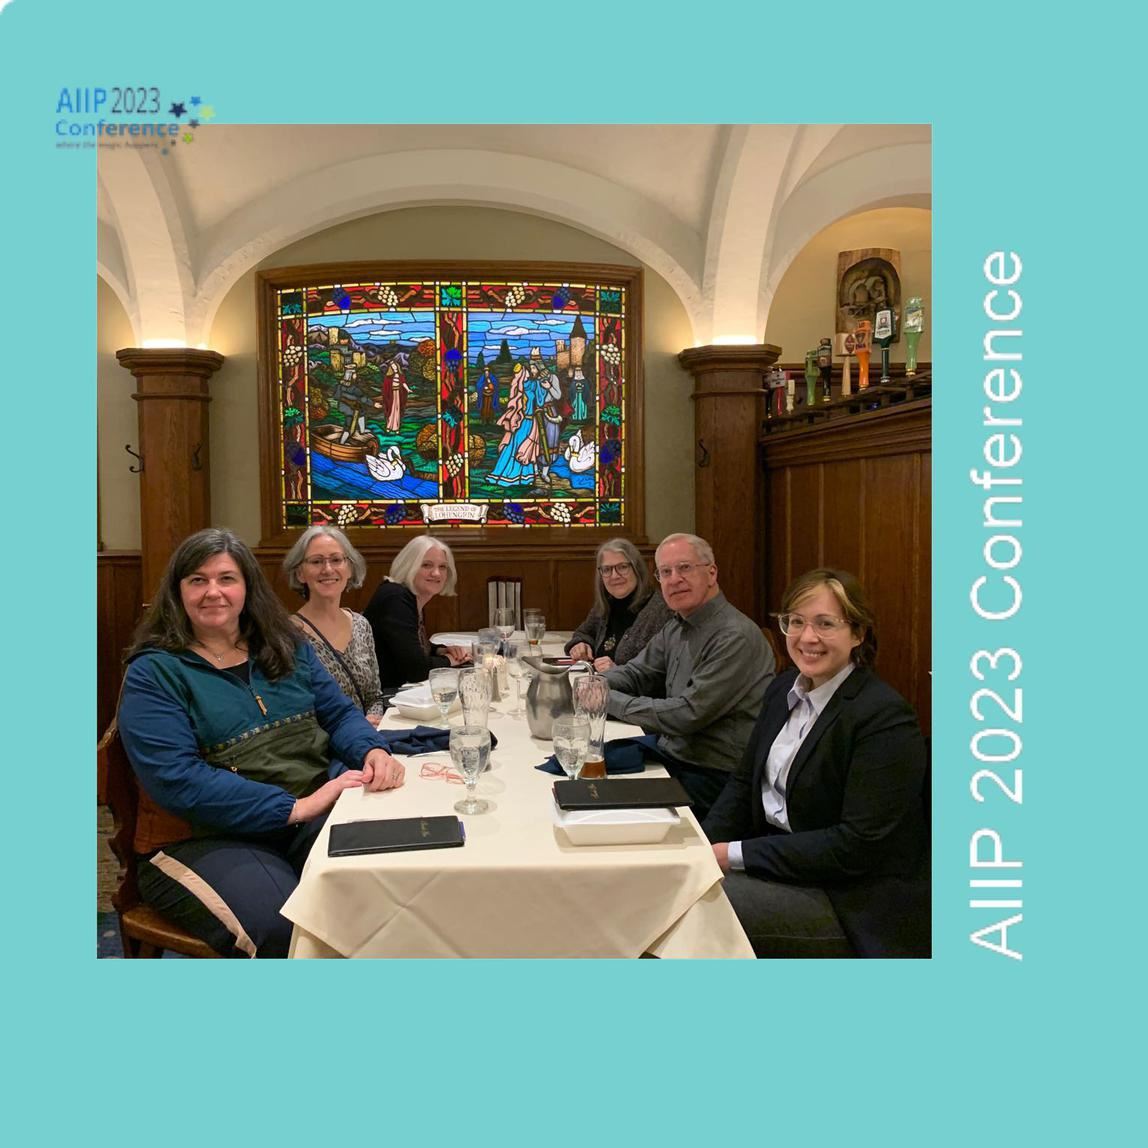 Members connecting at AIIP's 2023 conference in Milwaukee, Wisconsin